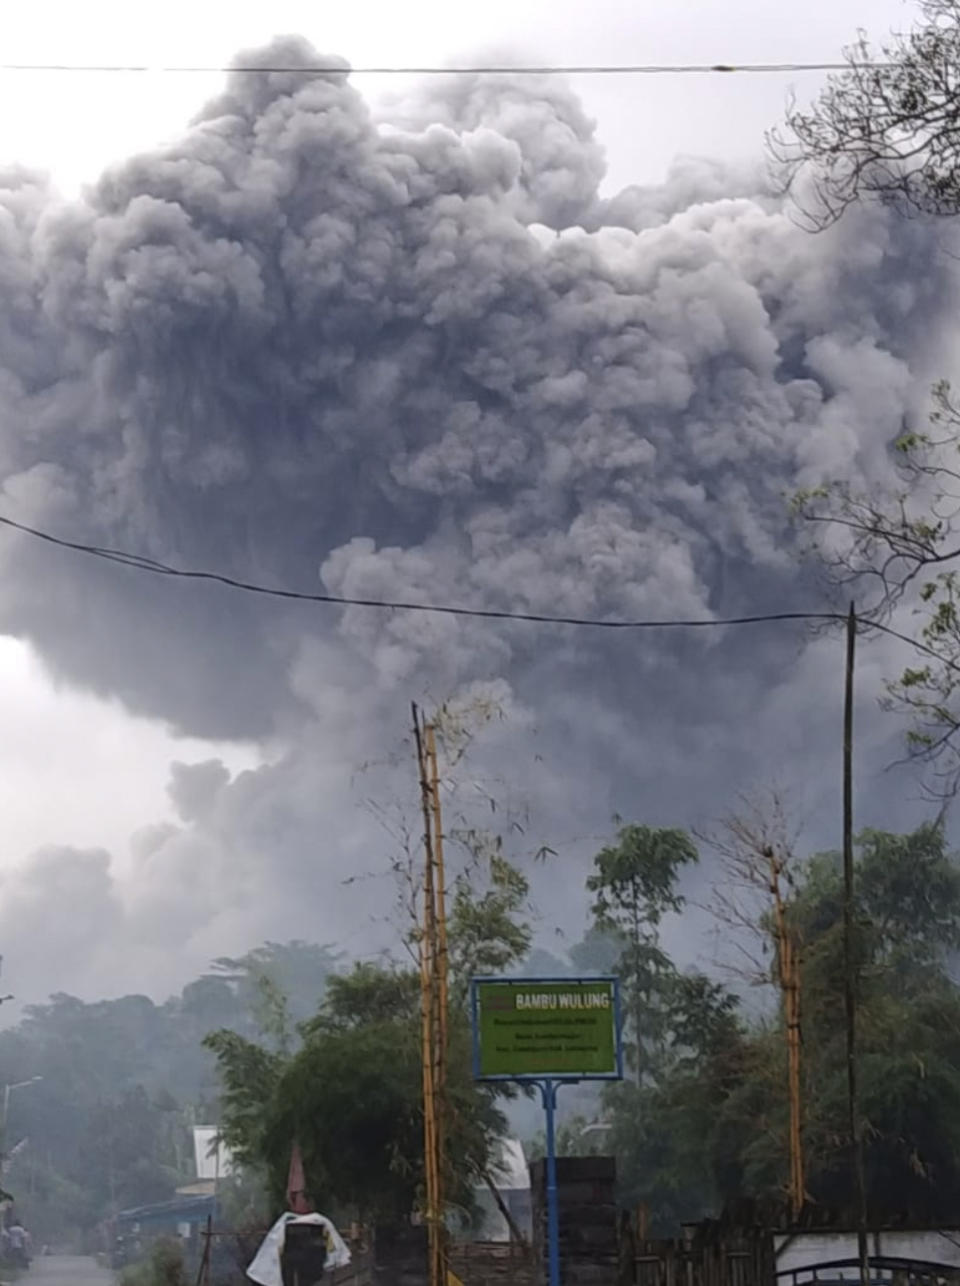 In this photo released by Indonesia's National Disaster Mitigation Agency (BNPB) Mount Semeru spews volcanic material during an eruption in Lumajang, East Java, Indonesia, Saturday, Jan. 16, 2021. The highest volcano on Indonesia's most densely populated island of Java, spewed hot clouds as far away as 4.5 kilometers (nearly 3 miles) on Saturday. (National Disaster Mitigation Agency via AP)